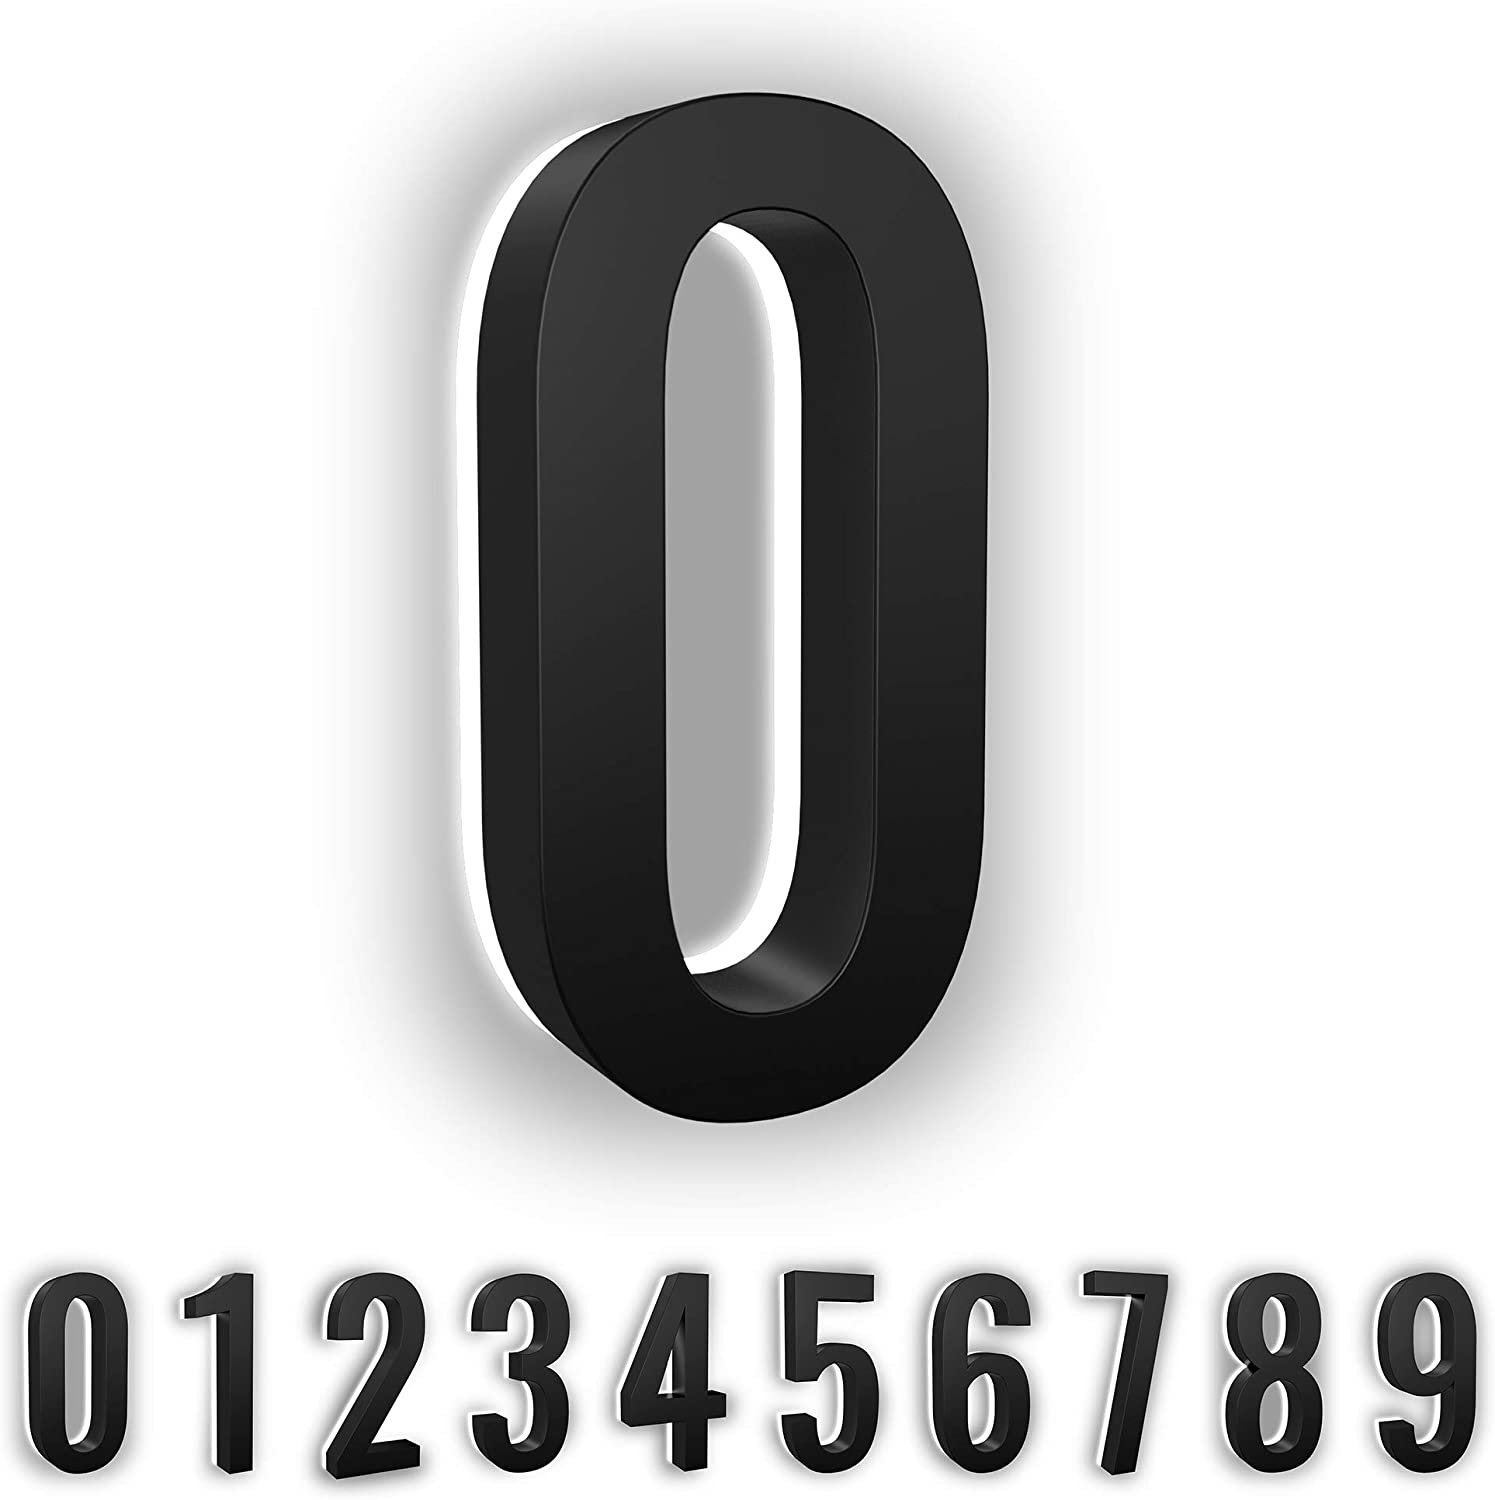 LumaNumbers Low-Voltage LED Address Numbers, Durable ABS-Polymer Lighted House Numbers, 5-inch, Weather-Proof, Illuminated (Black, 0) Power Source Required, Back-plate Recommended - image 1 of 5